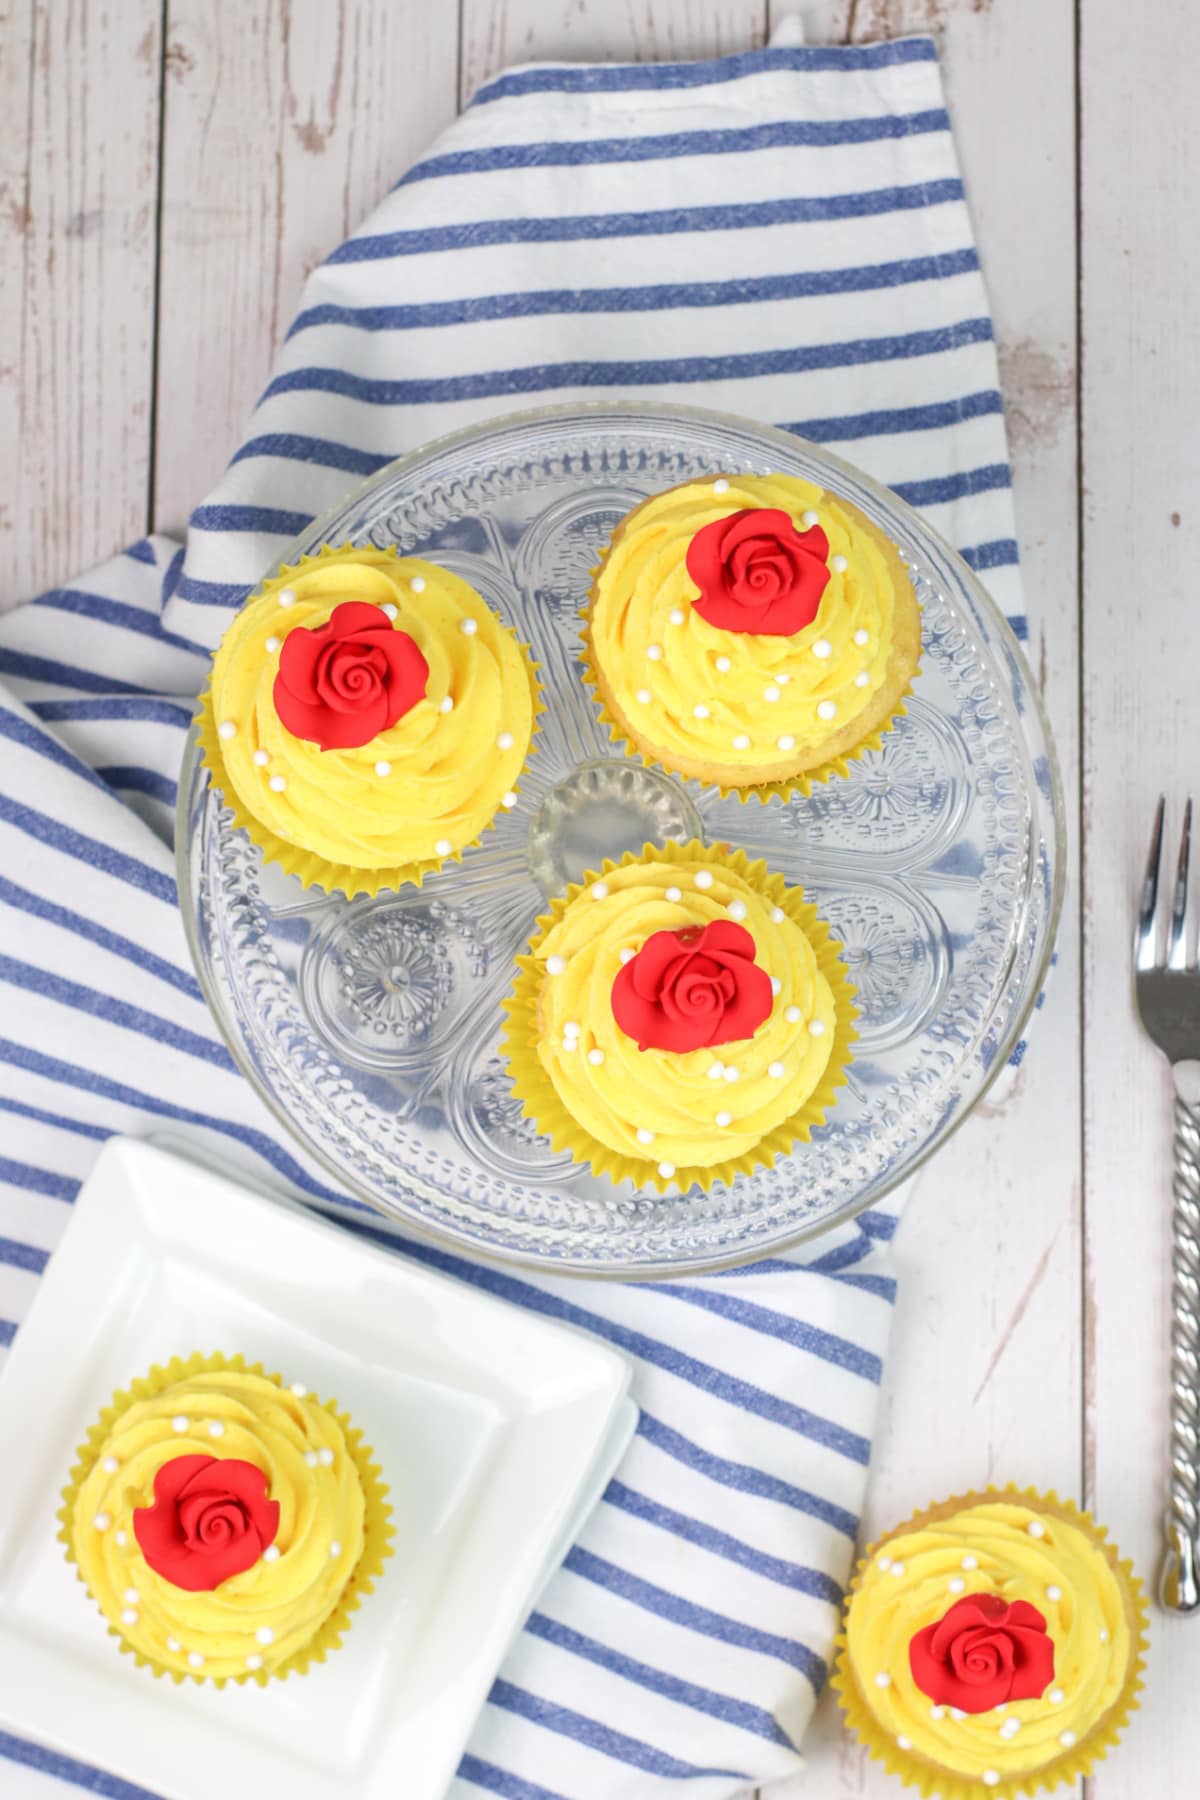 beauty and the beast cupcakes on striped towel